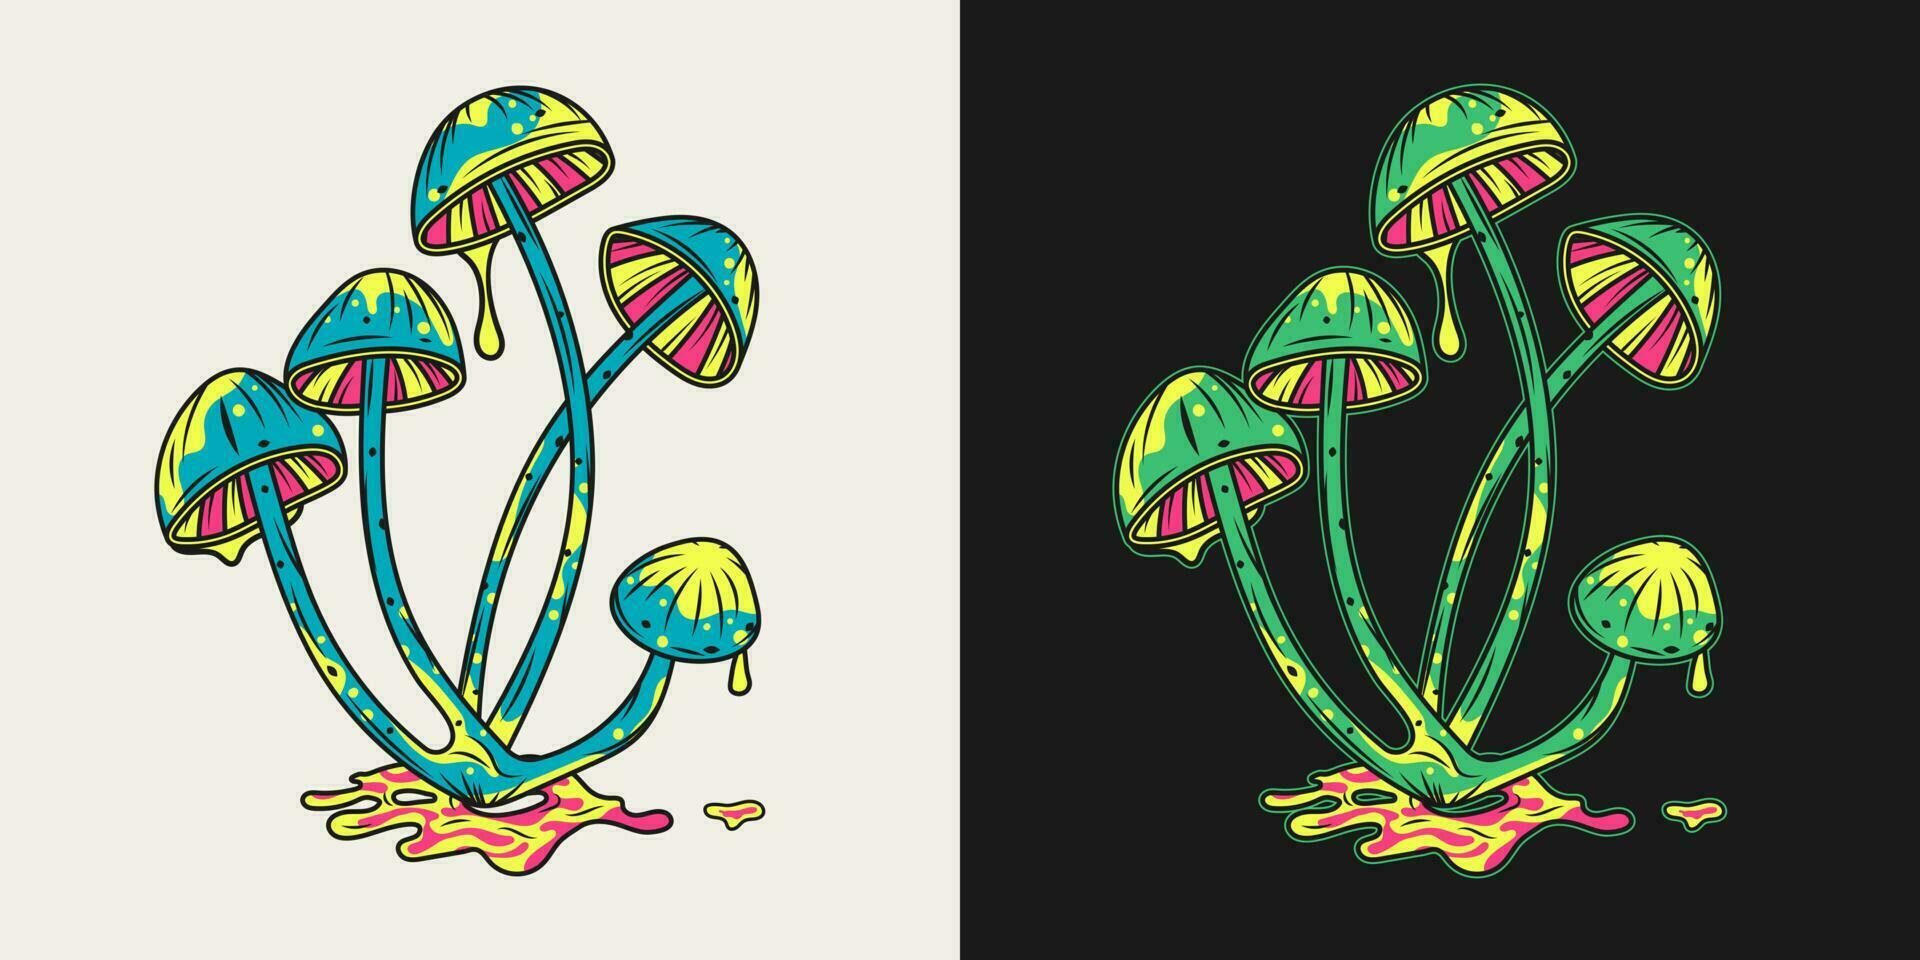 Bunch of fantasy magic mushrooms with toxic dripping liquid. Bright unusual poisonous fungus. Good for groovy, hippie, mystical, fairytale style vector